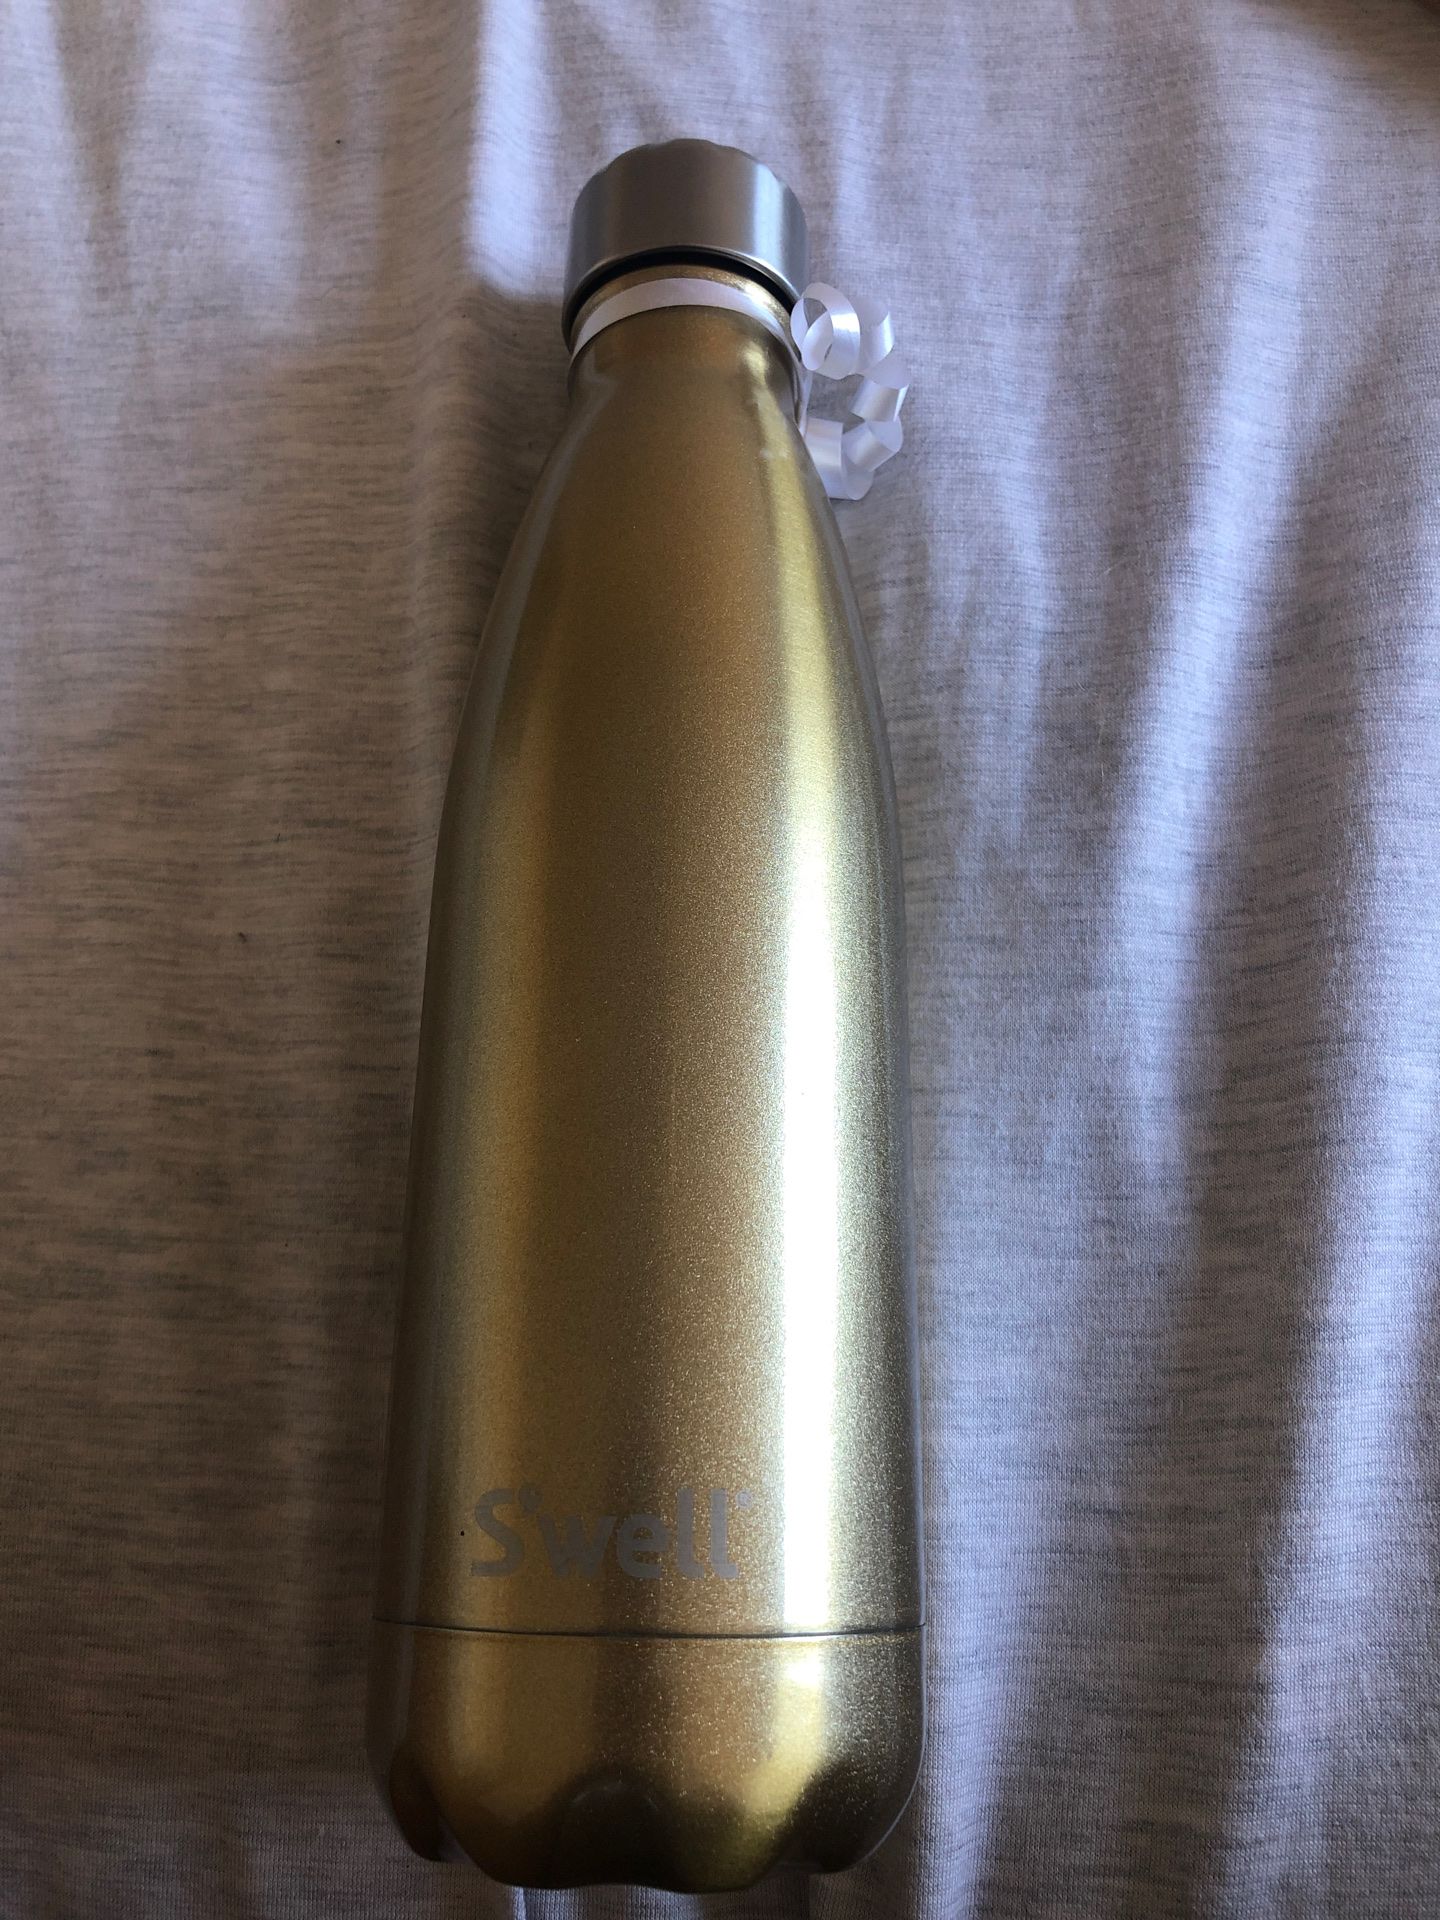 S'well Stainless Steel Water Bottle, 17oz, Pyrite